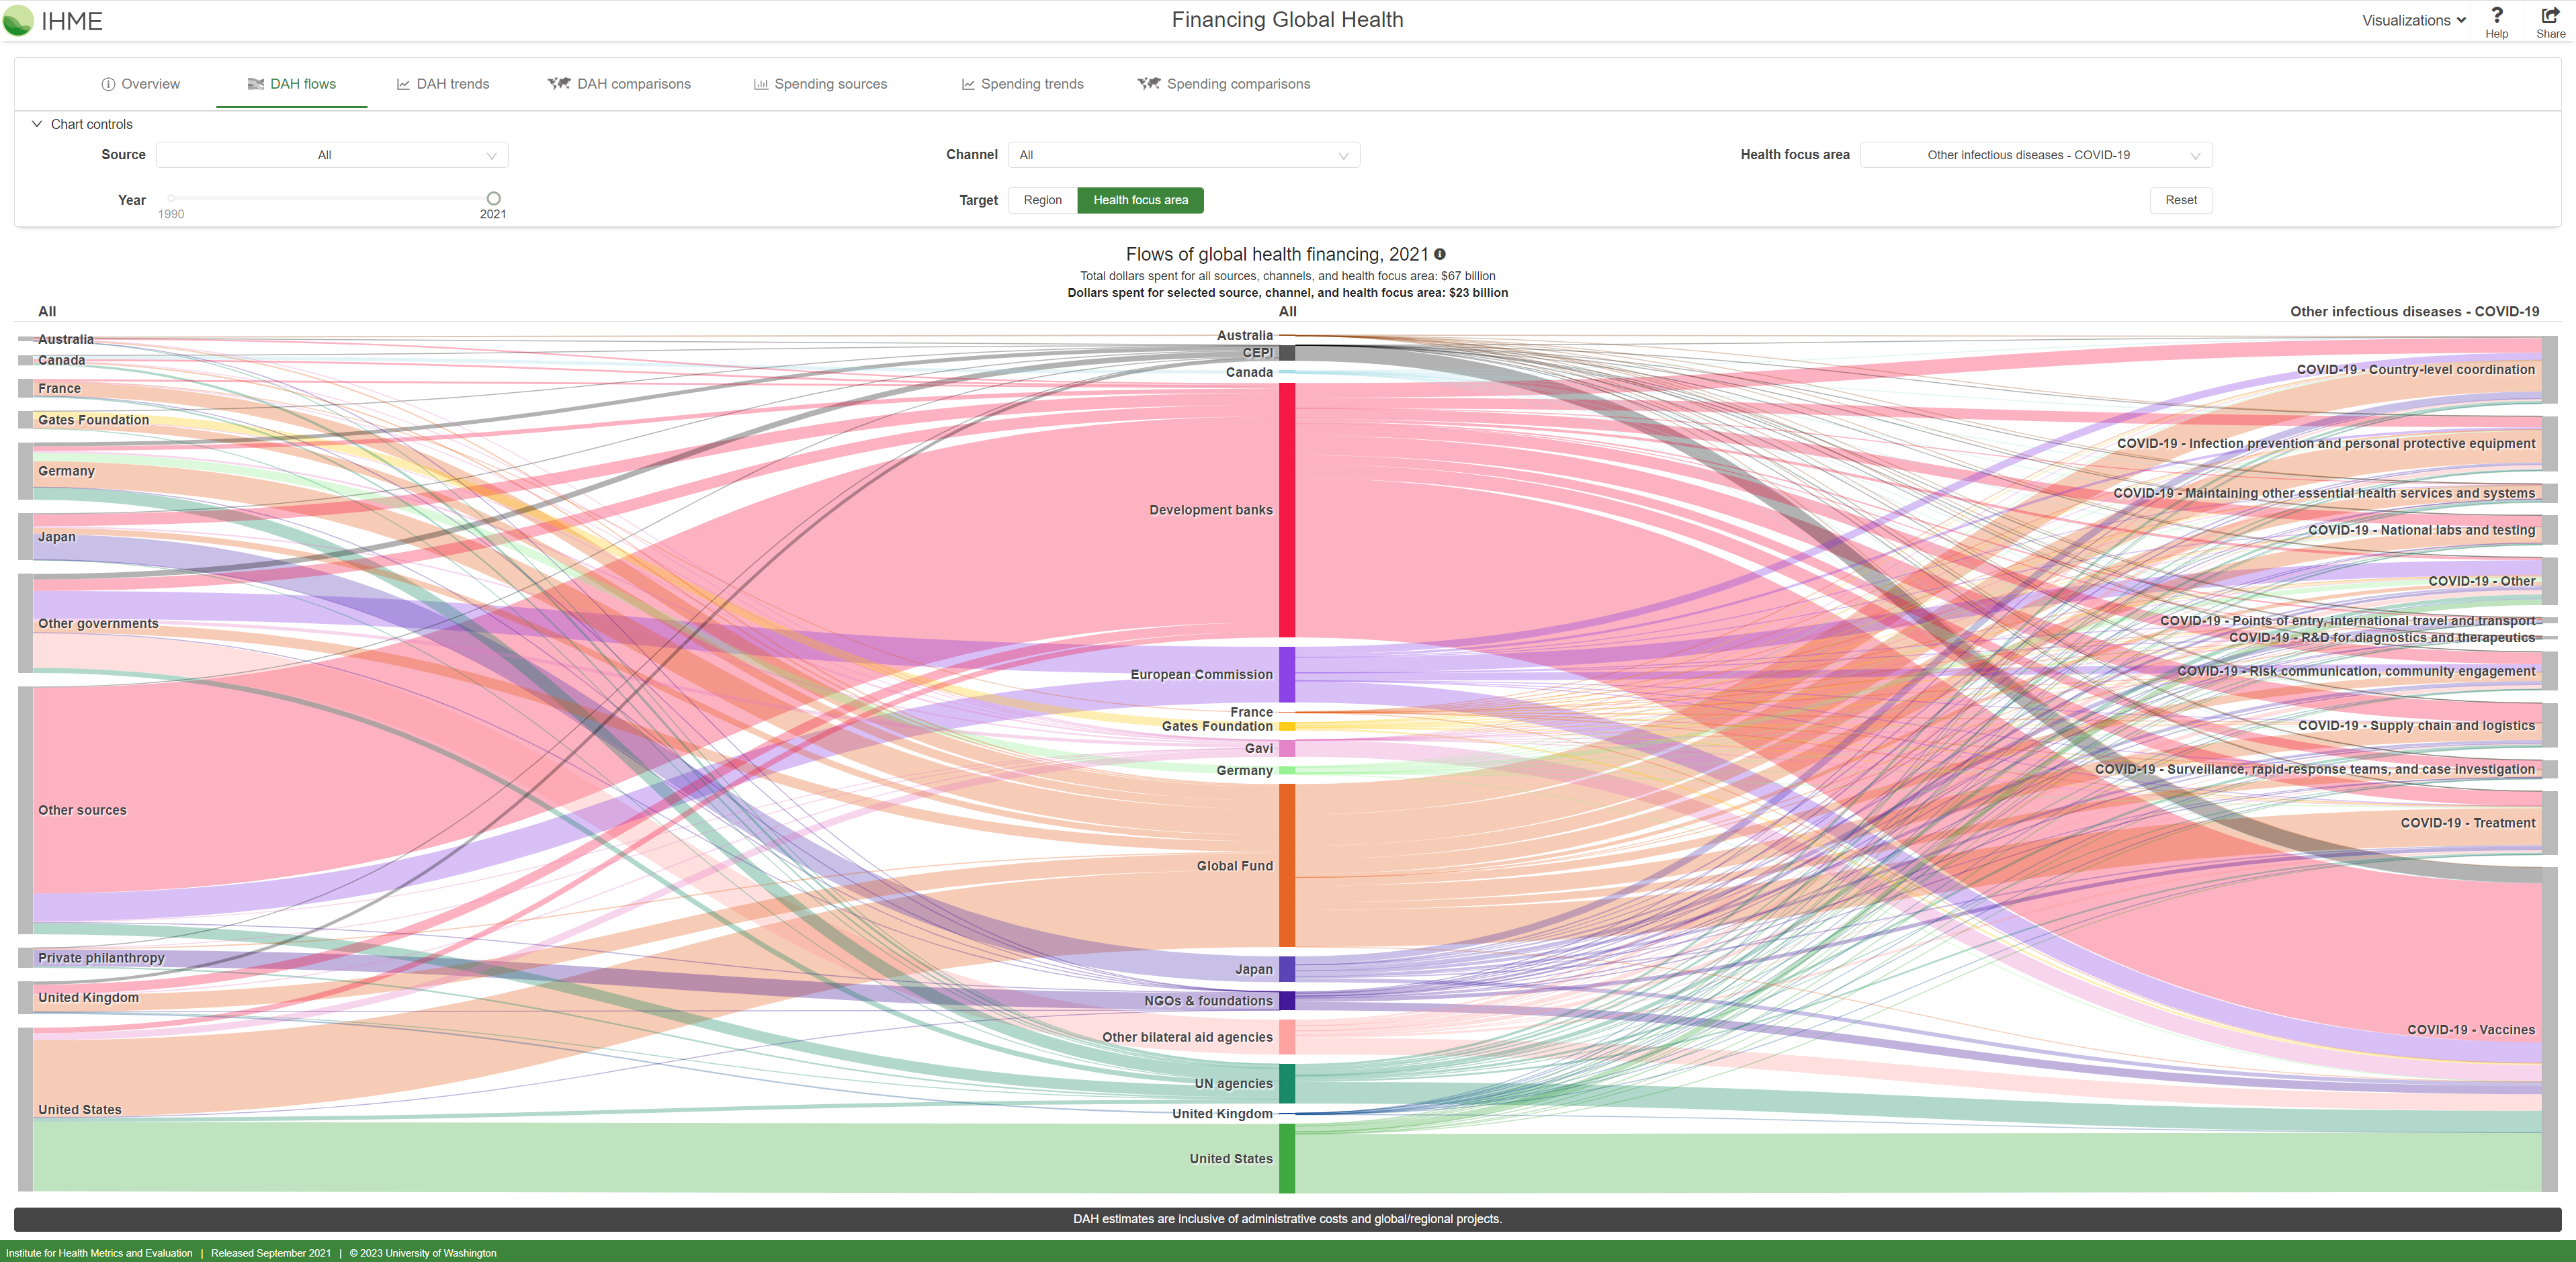 Interact with the Financing Global Health data visual.